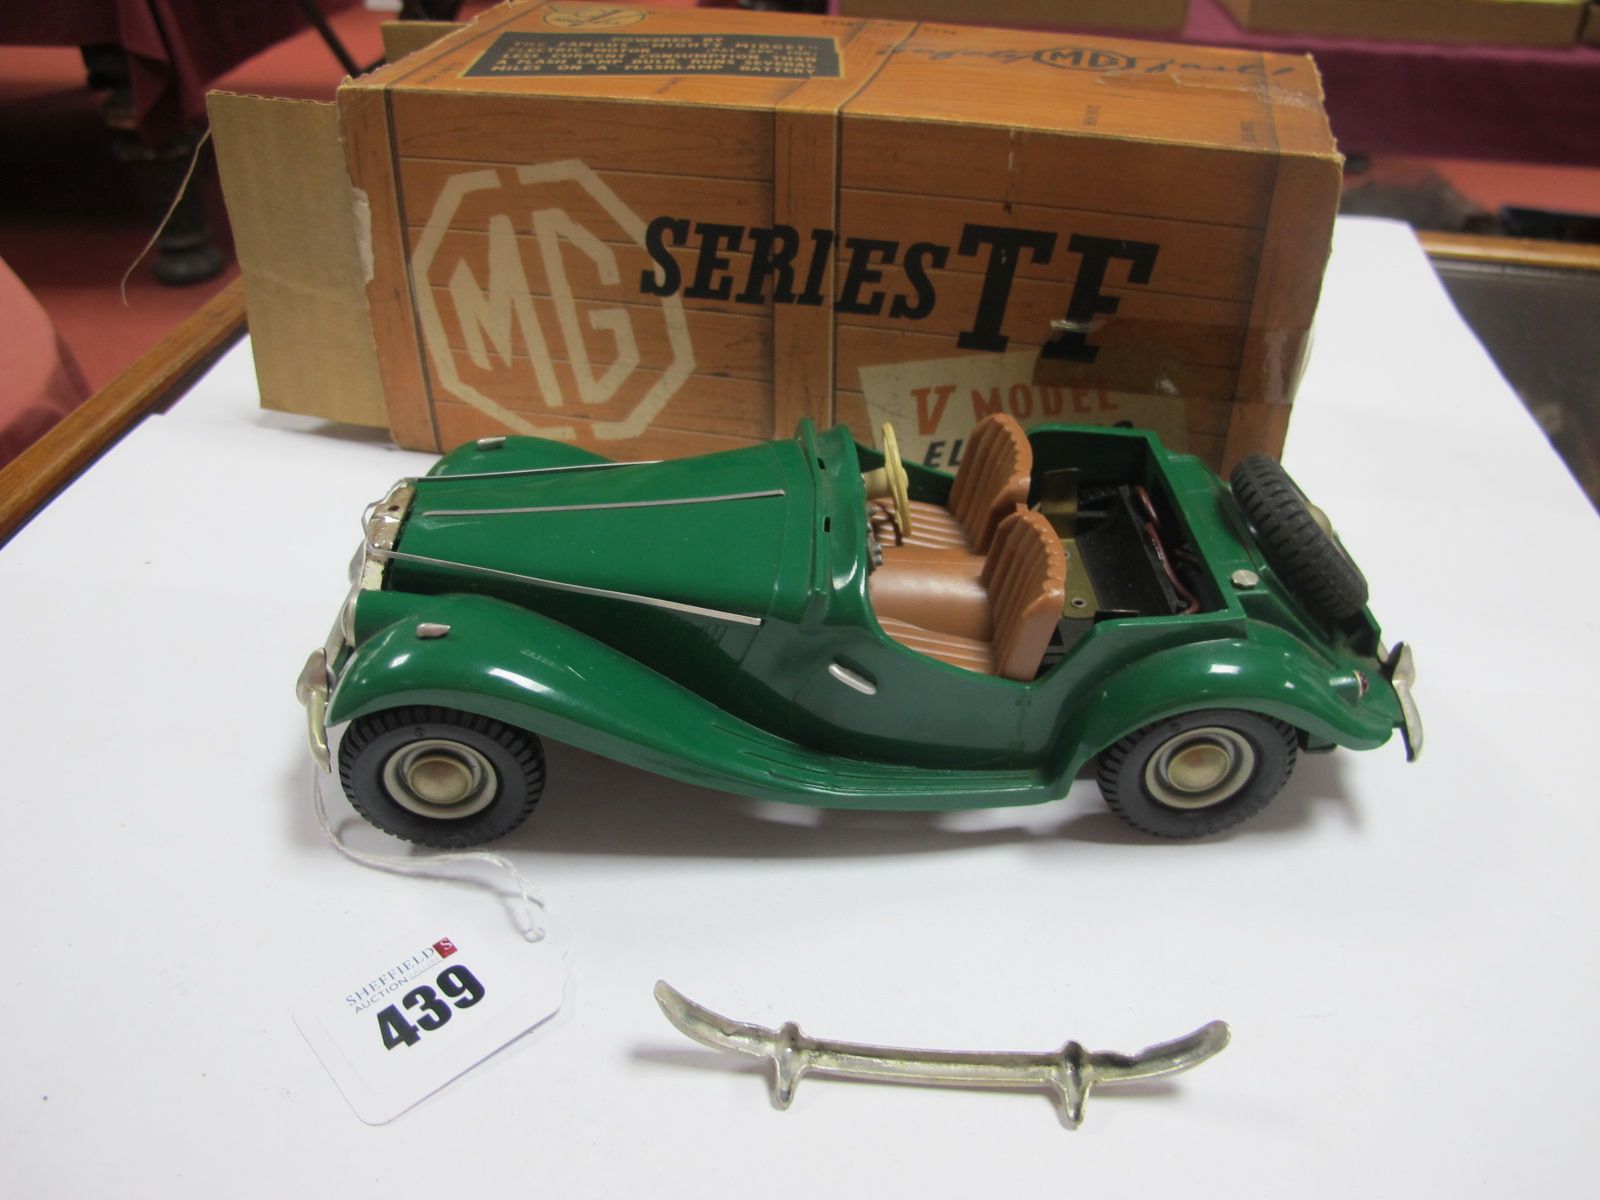 A Victory Industries MG Series TF, in green, extra bumper present (boxed).